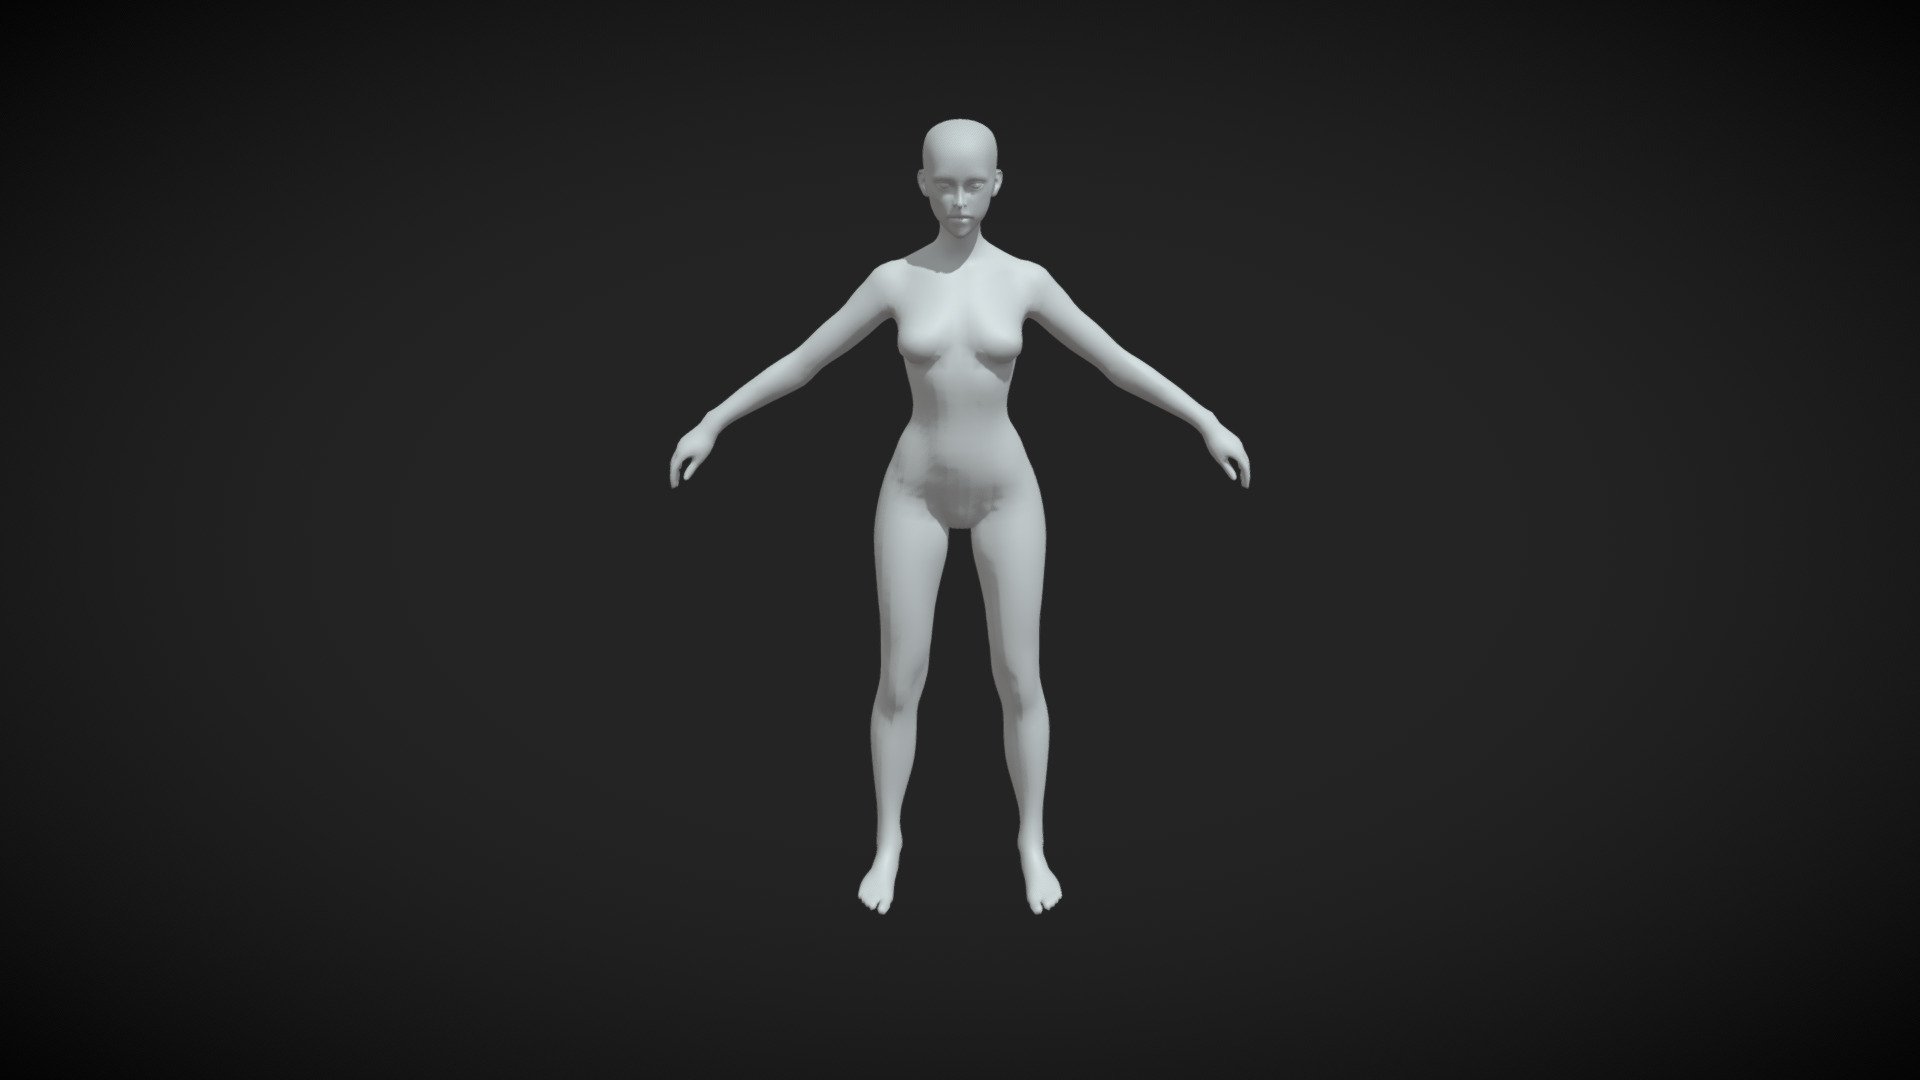 Introducing our Female Character Body Base Mesh 3D model – the essential starting point for your character design projects! 👩💻 Crafted with meticulous detail and anatomical accuracy, this versatile mesh provides a solid foundation for character modeling, animation, and sculpting. Whether you're a professional 3D artist, an aspiring animator, or a game developer, our Female Character Body Base Mesh offers the flexibility and realism you need to bring your characters to life. Download now and unleash your creativity! #FemaleCharacter #BodyBaseMesh #3DModeling #CharacterDesign #DigitalArt - Female Character Body Base Mesh - Buy Royalty Free 3D model by Sujit Mishra (@sujitanshumishra) 3d model